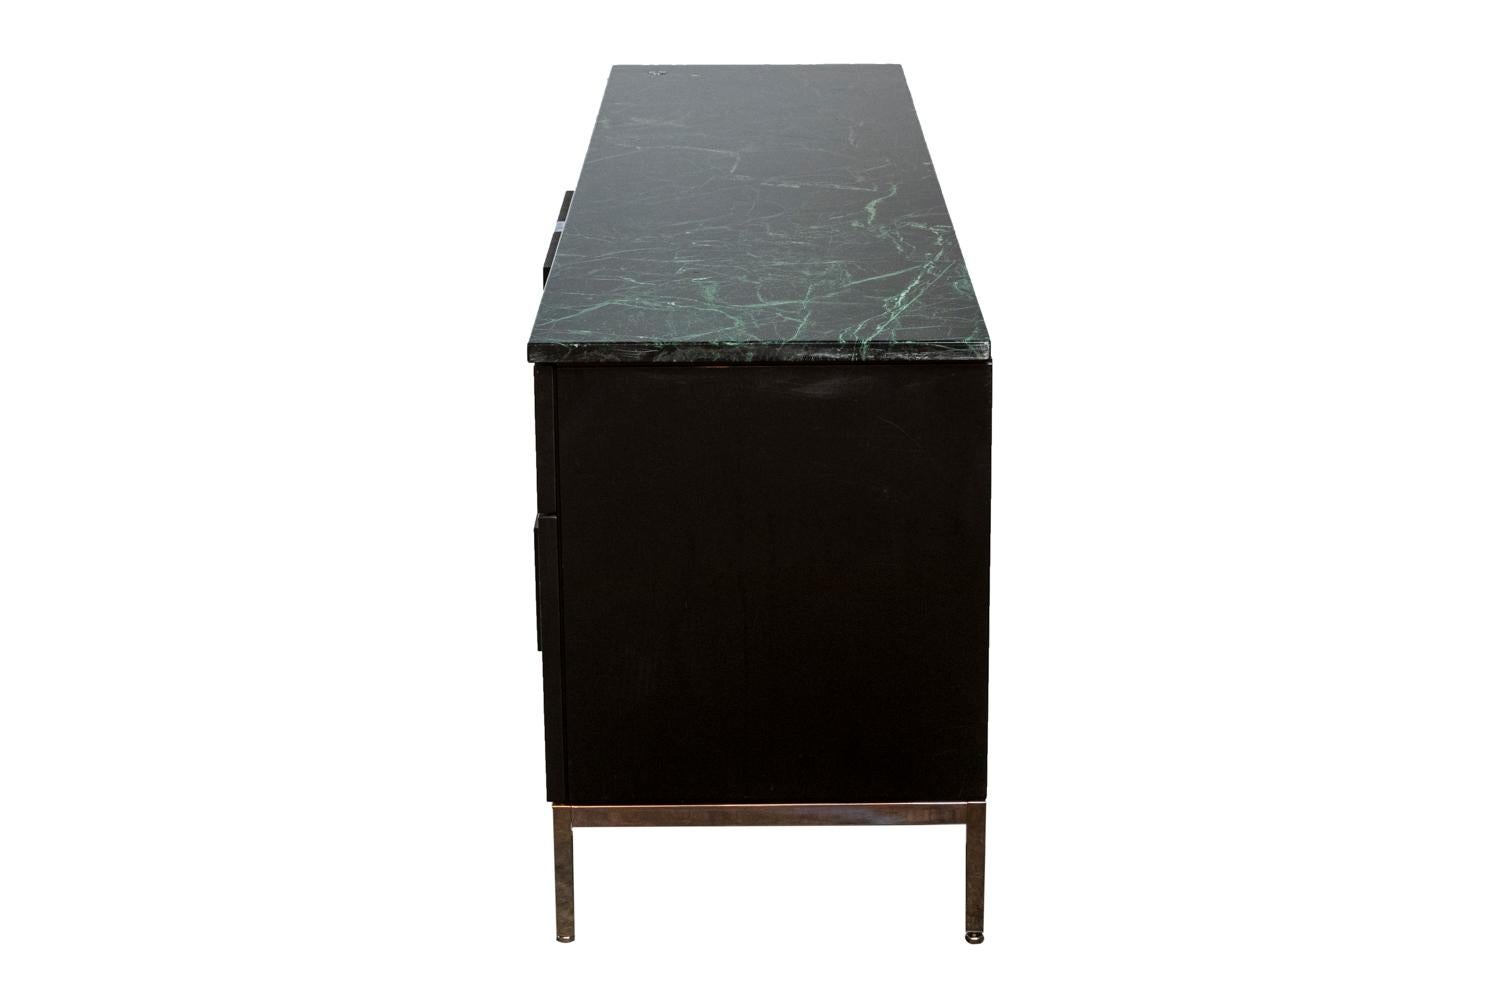 Florence Knoll, attributed to.
Knoll International, edited by. 

Sideboard. Black lacquered oak cabinet. White veined black marble top. Square-section, chromed tubular steel base. Four front compartments, two opening onto shelves and two with